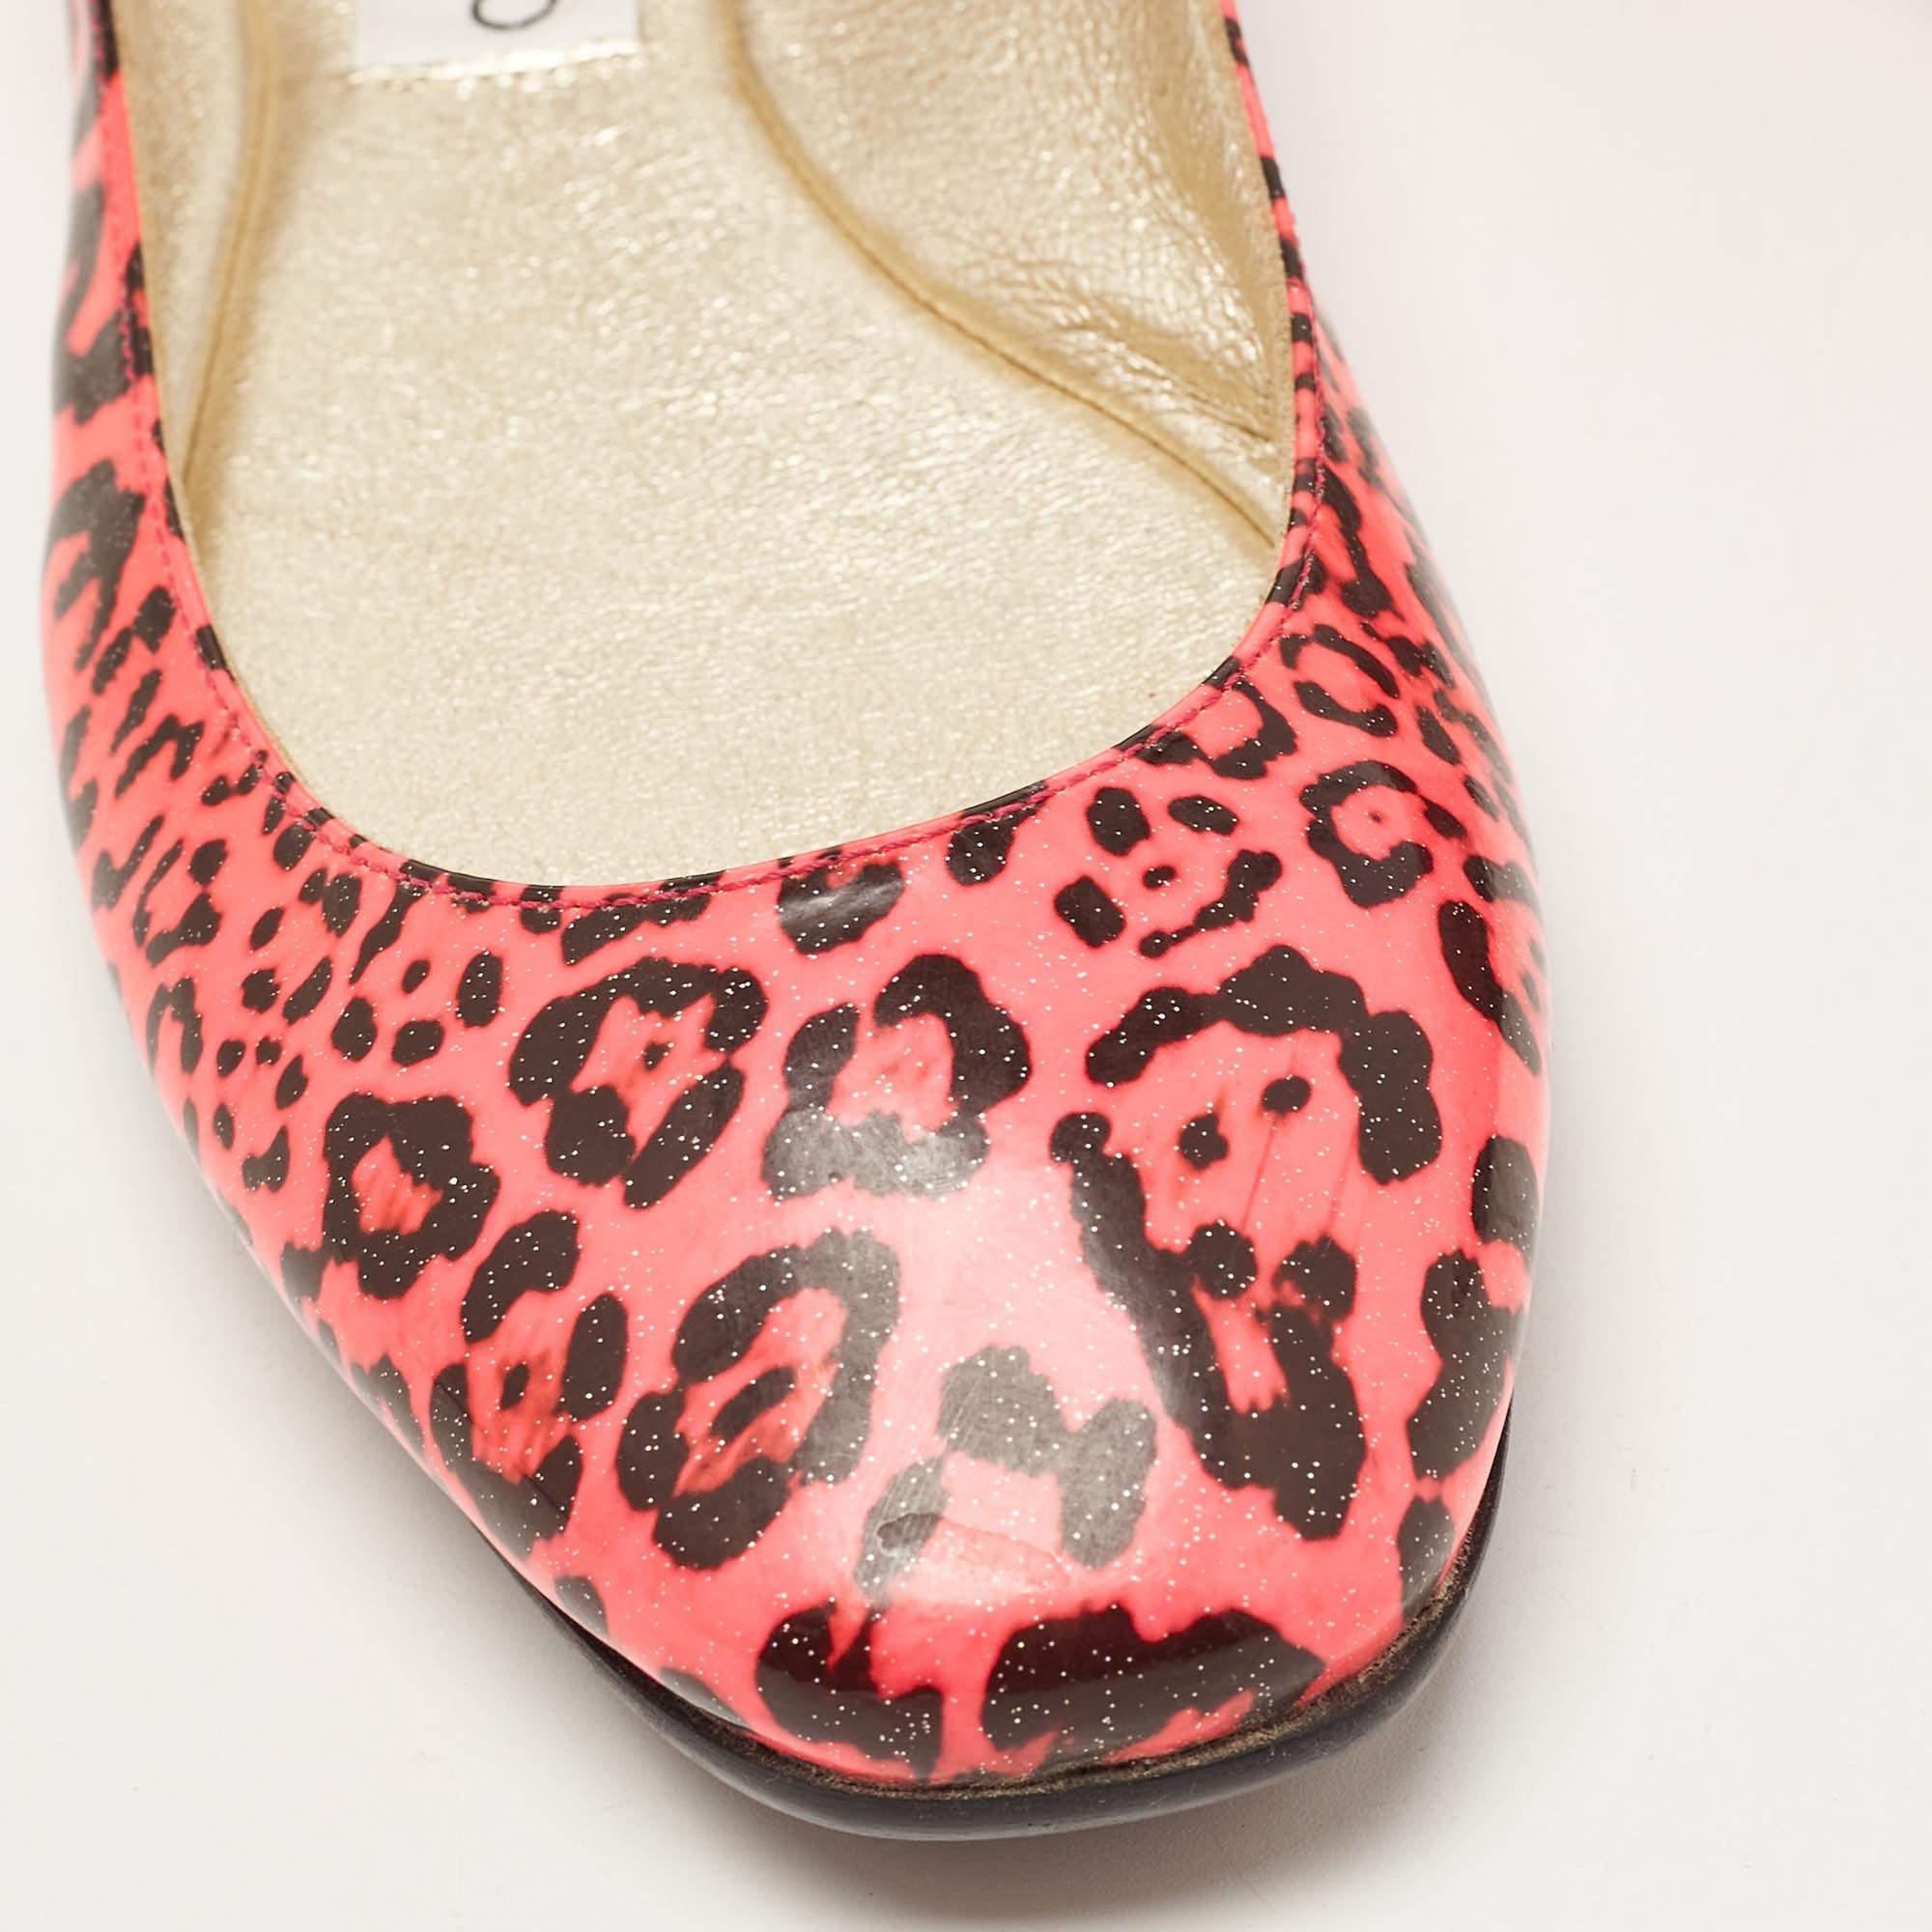 Jimmy Choo Pink/Black Leopard Print Patent Leather Ballet Flats Size 37 For Sale 2